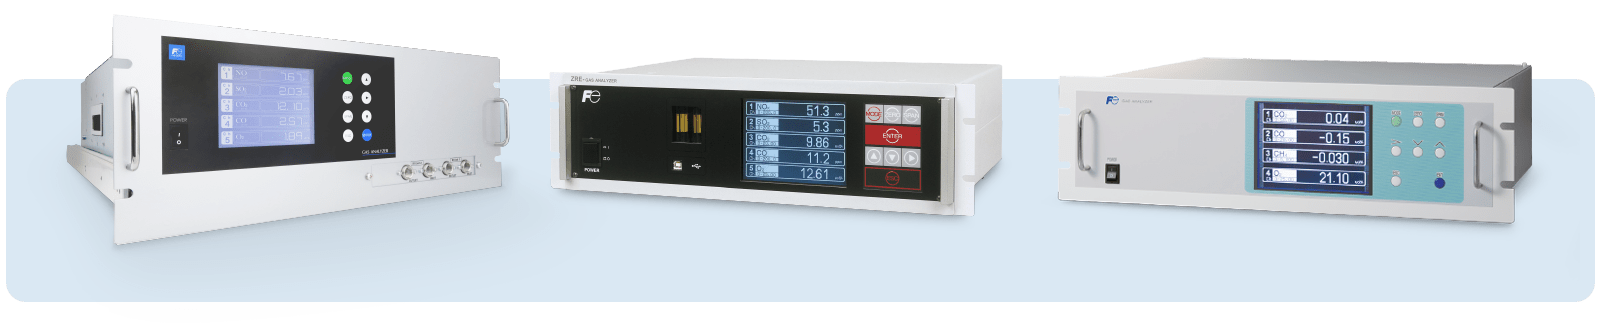 Disadvantages of electrochemical oxygen analysers :